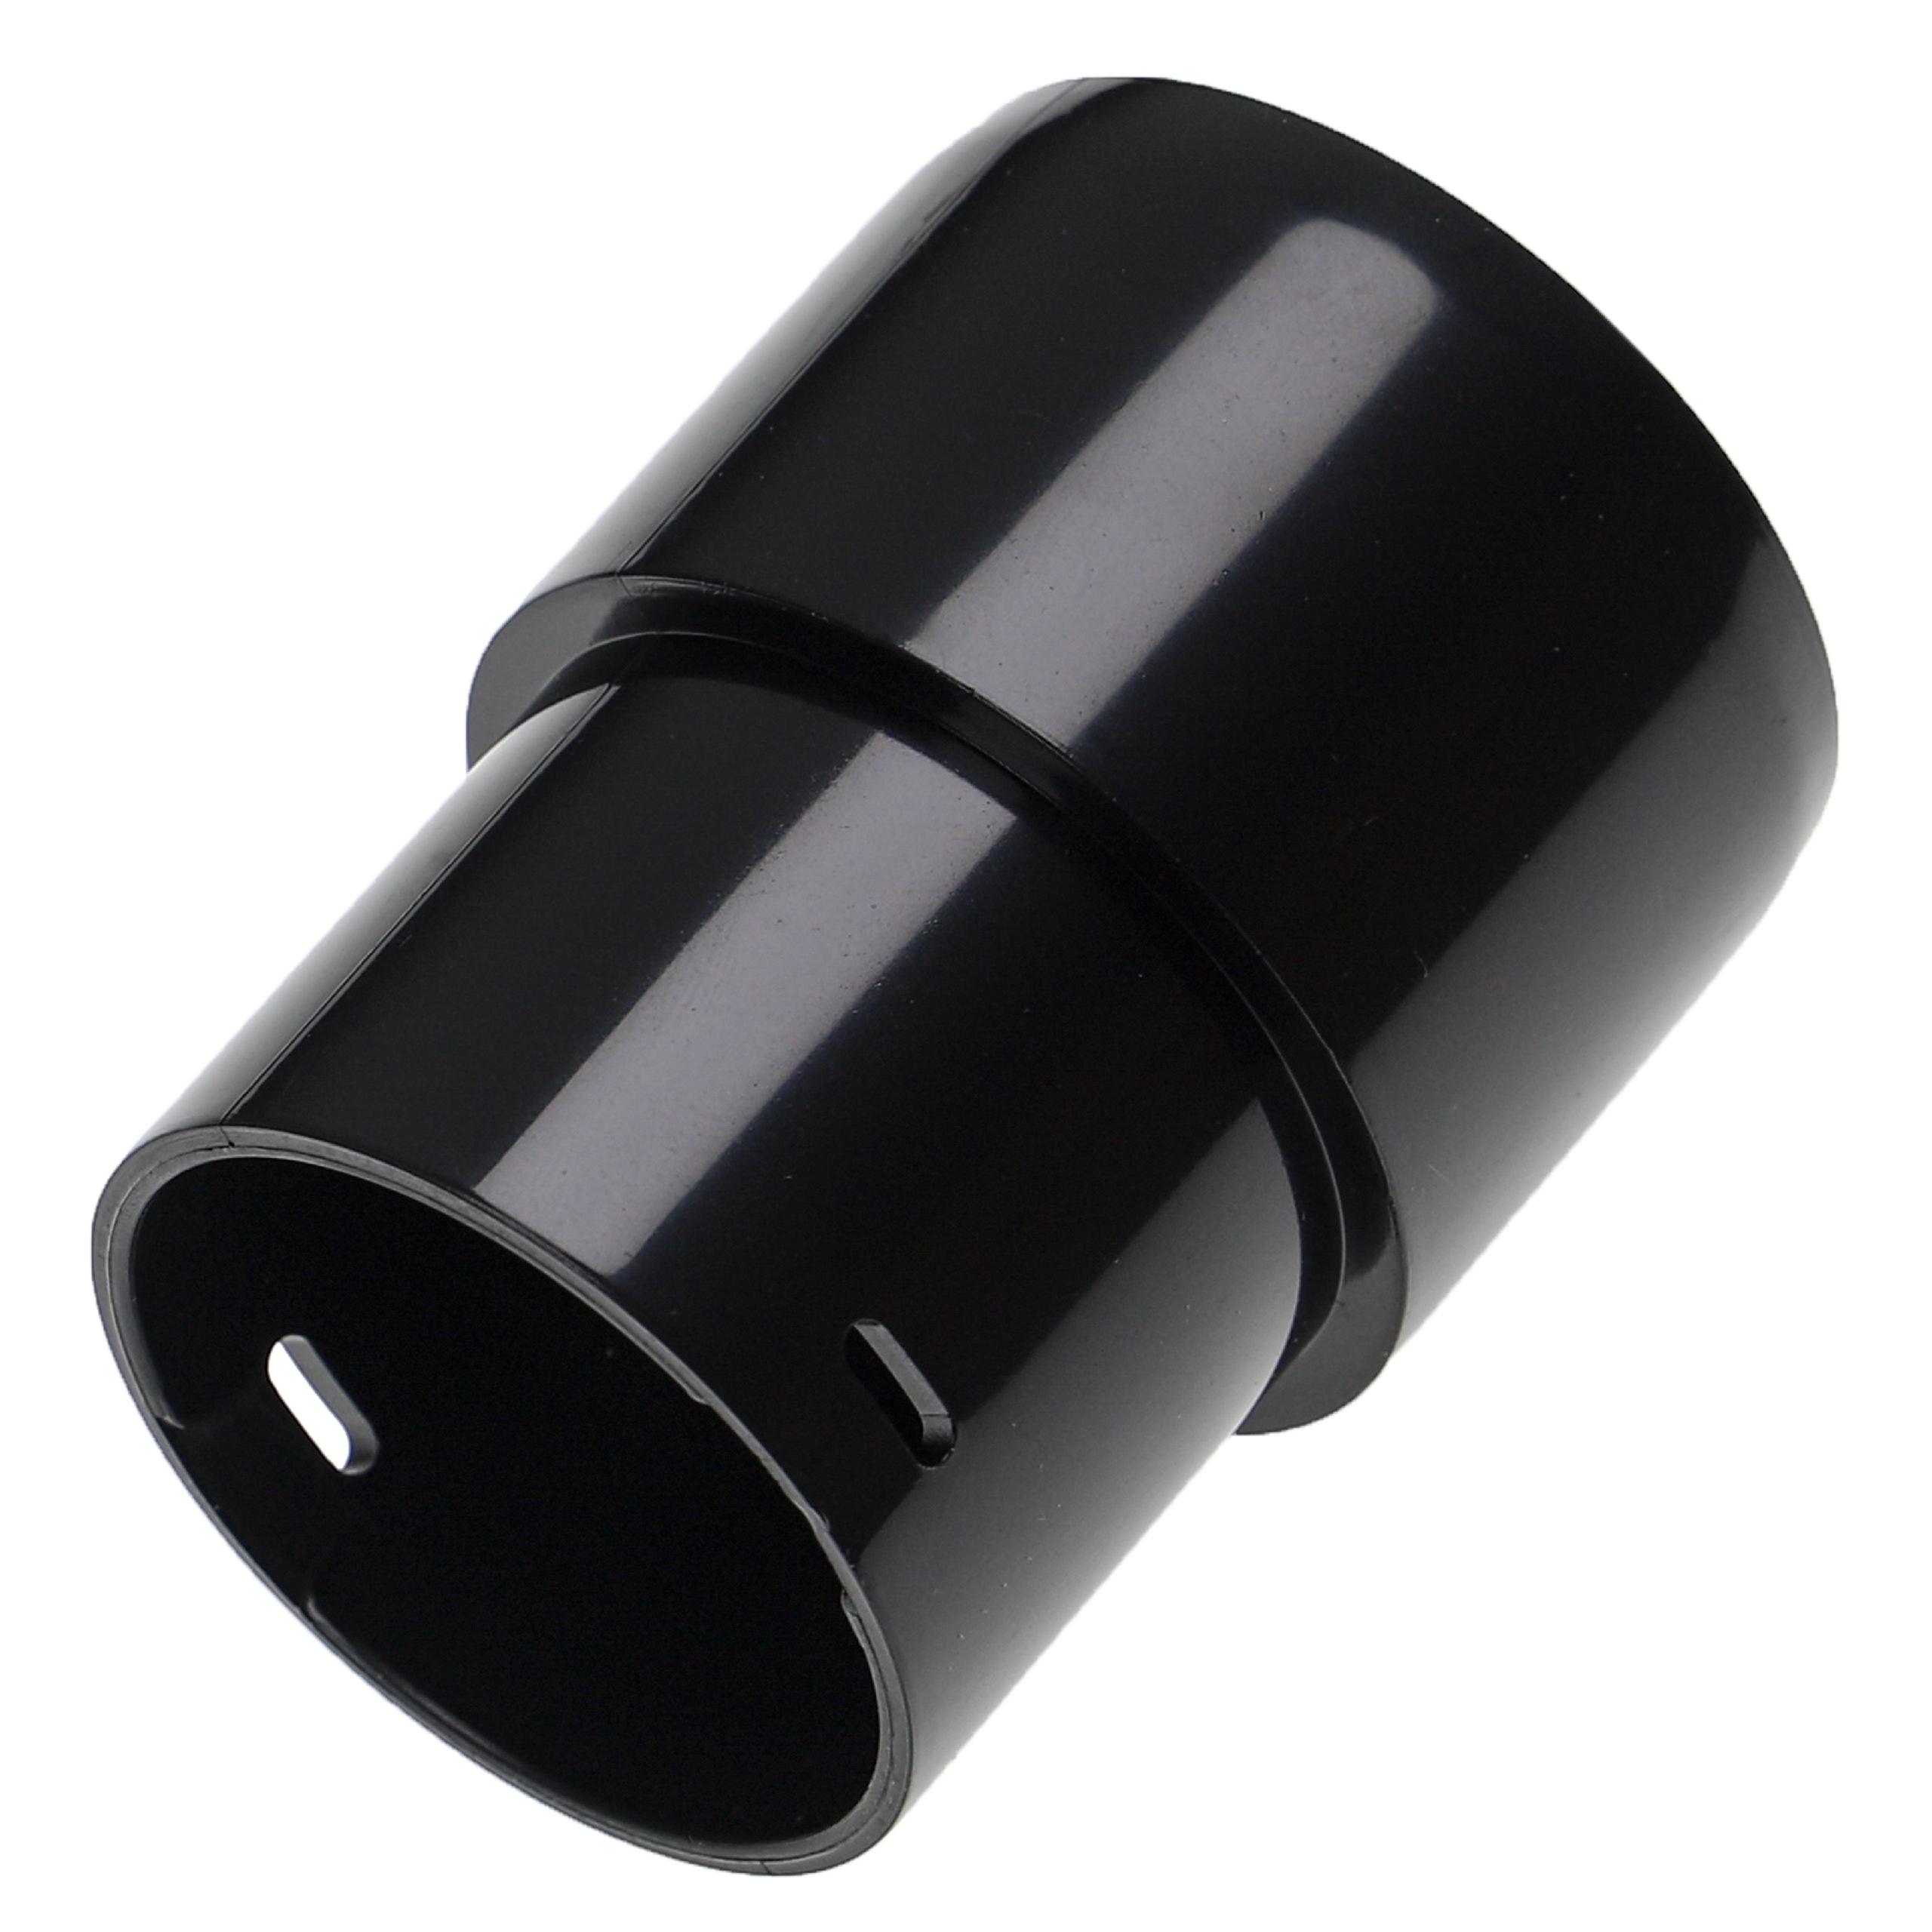 Hose Adapter for Moulinex Vacuum Cleaner u.a. - 58 mm Round Connector, Click System